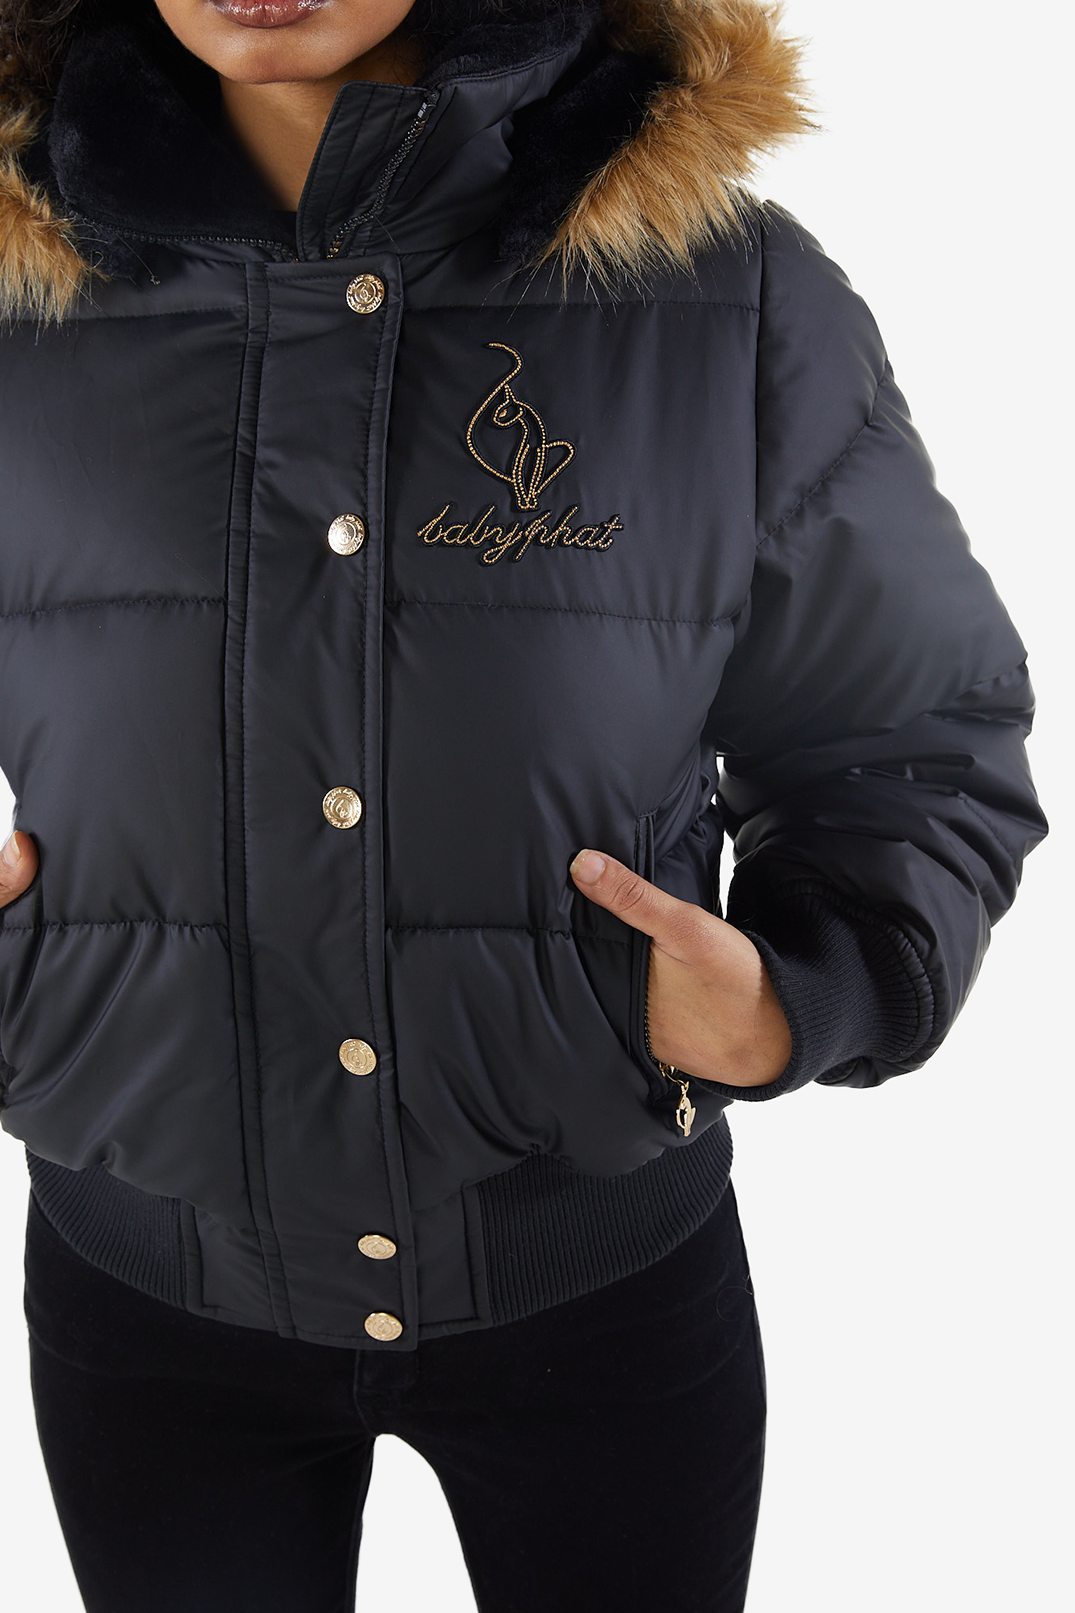 Baby Phat reissue OG puffer jacket in onyx is a matte black jacket that features a faux fur trim hood, cat logo detailing on the front and back, gold buttons, and a cat zipper pull.